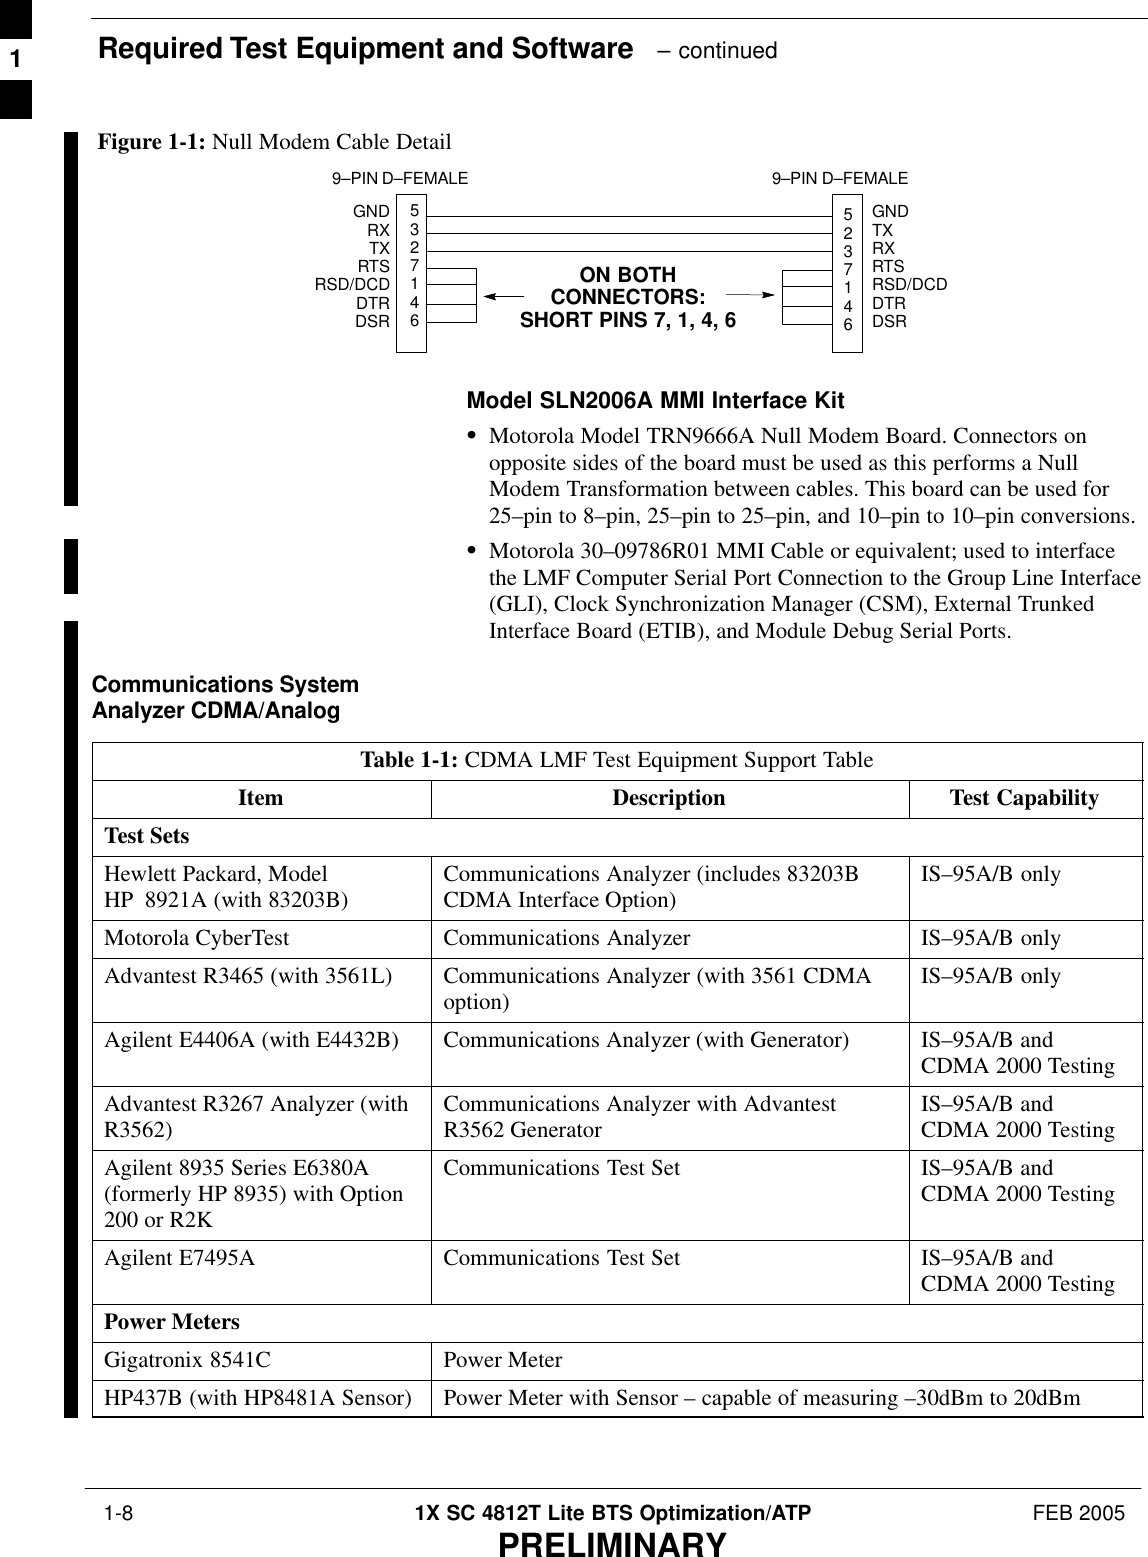 Required Test Equipment and Software   – continued 1-8 1X SC 4812T Lite BTS Optimization/ATP FEB 2005PRELIMINARY5327146GNDRXTXRTSRSD/DCDDTR DSRGNDTXRXRTSRSD/DCDDTRDSRON BOTHCONNECTORS:SHORT PINS 7, 1, 4, 69–PIN D–FEMALE 9–PIN D–FEMALE5237146Figure 1-1: Null Modem Cable DetailModel SLN2006A MMI Interface KitSMotorola Model TRN9666A Null Modem Board. Connectors onopposite sides of the board must be used as this performs a NullModem Transformation between cables. This board can be used for25–pin to 8–pin, 25–pin to 25–pin, and 10–pin to 10–pin conversions.SMotorola 30–09786R01 MMI Cable or equivalent; used to interfacethe LMF Computer Serial Port Connection to the Group Line Interface(GLI), Clock Synchronization Manager (CSM), External TrunkedInterface Board (ETIB), and Module Debug Serial Ports.Communications SystemAnalyzer CDMA/Analog Table 1-1: CDMA LMF Test Equipment Support TableItem Description Test CapabilityTest SetsHewlett Packard, ModelHP 8921A (with 83203B) Communications Analyzer (includes 83203BCDMA Interface Option) IS–95A/B onlyMotorola CyberTest Communications Analyzer IS–95A/B onlyAdvantest R3465 (with 3561L) Communications Analyzer (with 3561 CDMAoption) IS–95A/B onlyAgilent E4406A (with E4432B) Communications Analyzer (with Generator) IS–95A/B andCDMA 2000 TestingAdvantest R3267 Analyzer (withR3562) Communications Analyzer with AdvantestR3562 Generator IS–95A/B andCDMA 2000 TestingAgilent 8935 Series E6380A(formerly HP 8935) with Option200 or R2KCommunications Test Set IS–95A/B andCDMA 2000 TestingAgilent E7495A Communications Test Set IS–95A/B andCDMA 2000 TestingPower MetersGigatronix 8541C Power MeterHP437B (with HP8481A Sensor) Power Meter with Sensor – capable of measuring –30dBm to 20dBm 1